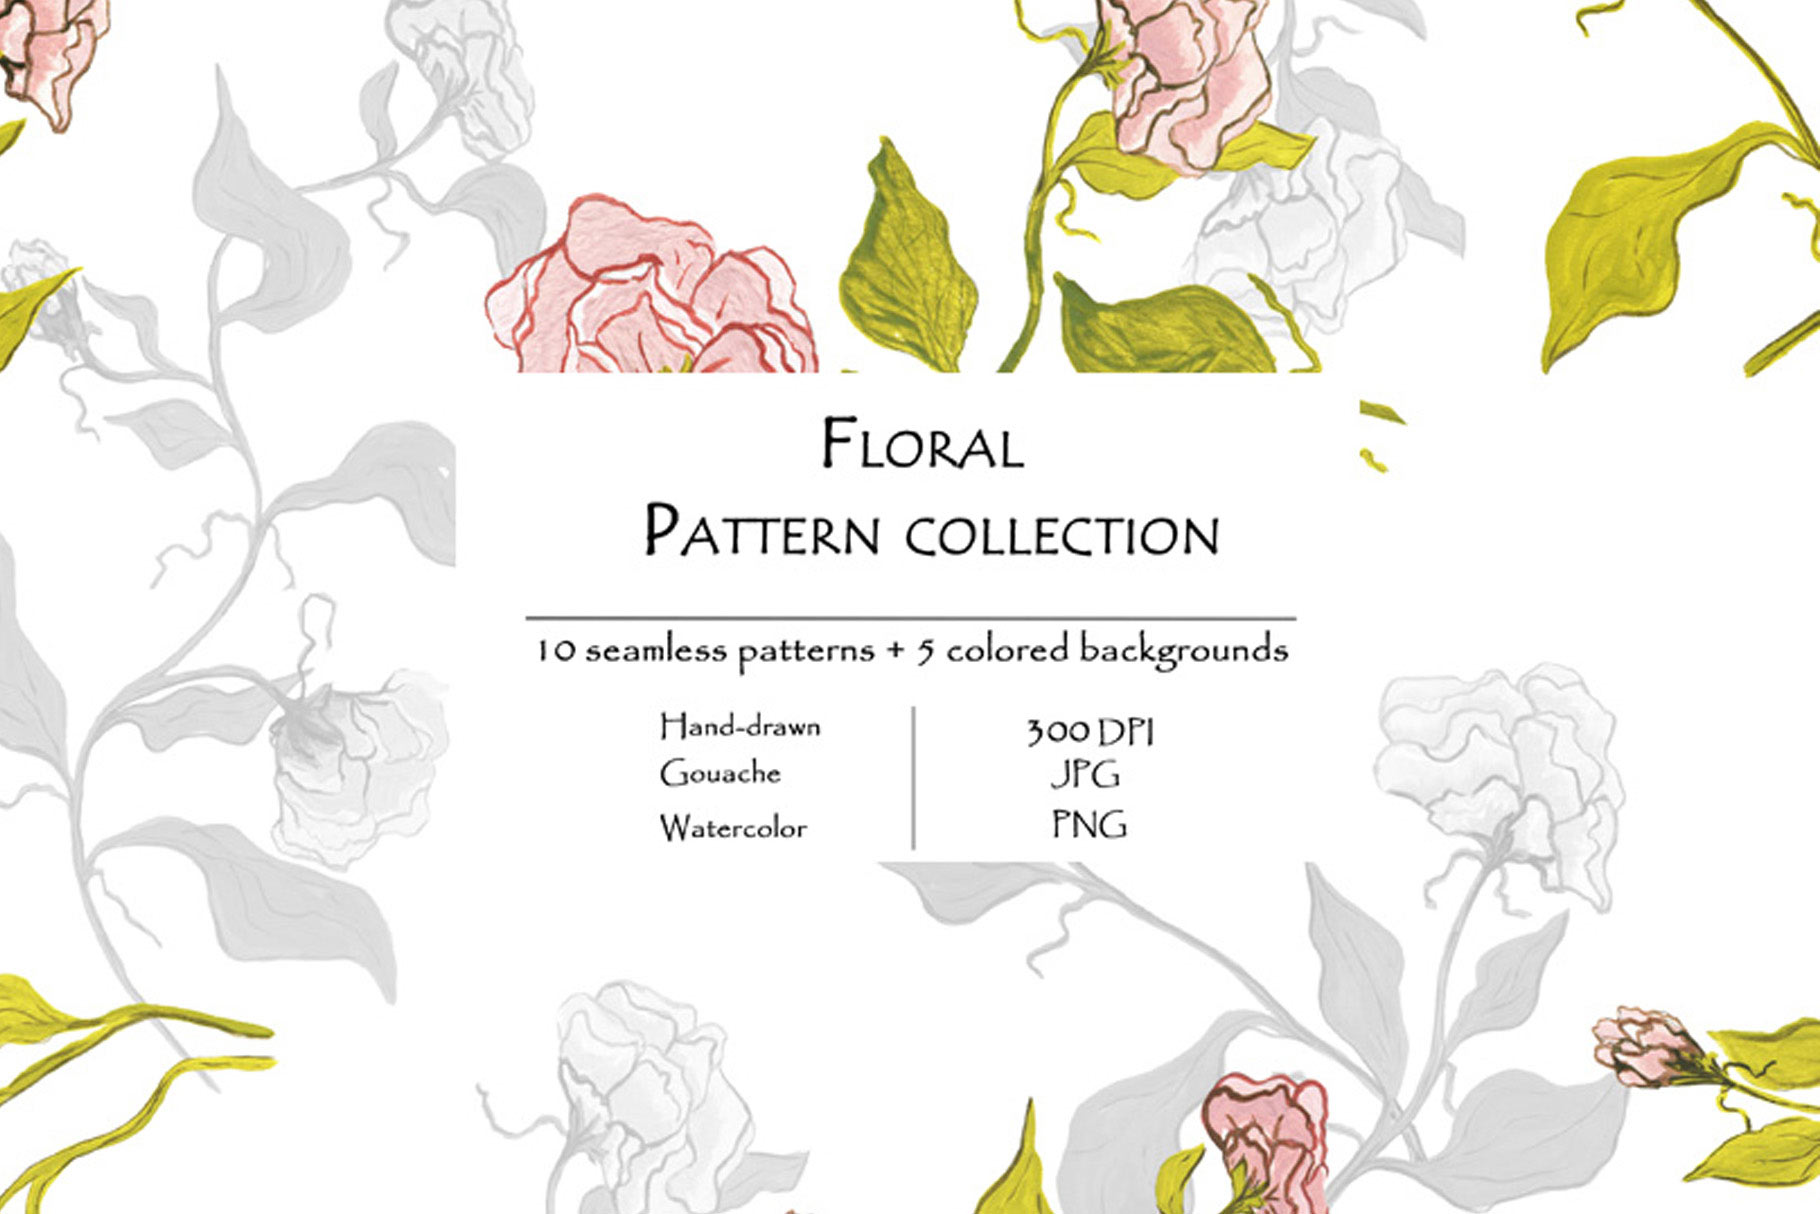 Floral Pattern Collection Of 10 Seamless Patterns And 5 Colored Backgrounds Roses.